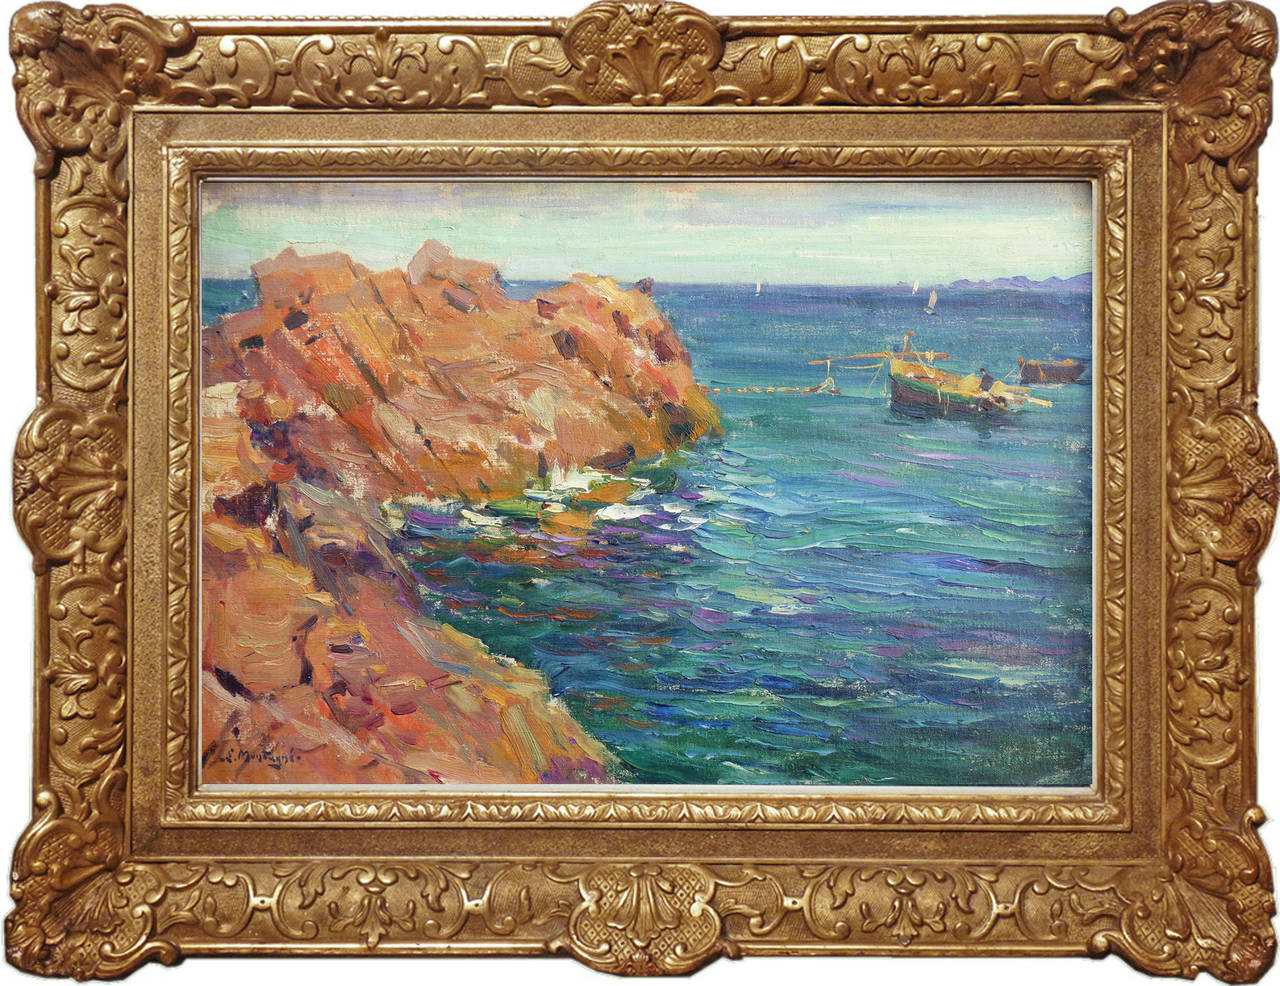 Agricol Louis Montagné Landscape Painting - View of Cliffs at Theoule-sur-mer, French Riviera. Marine landscape painting.